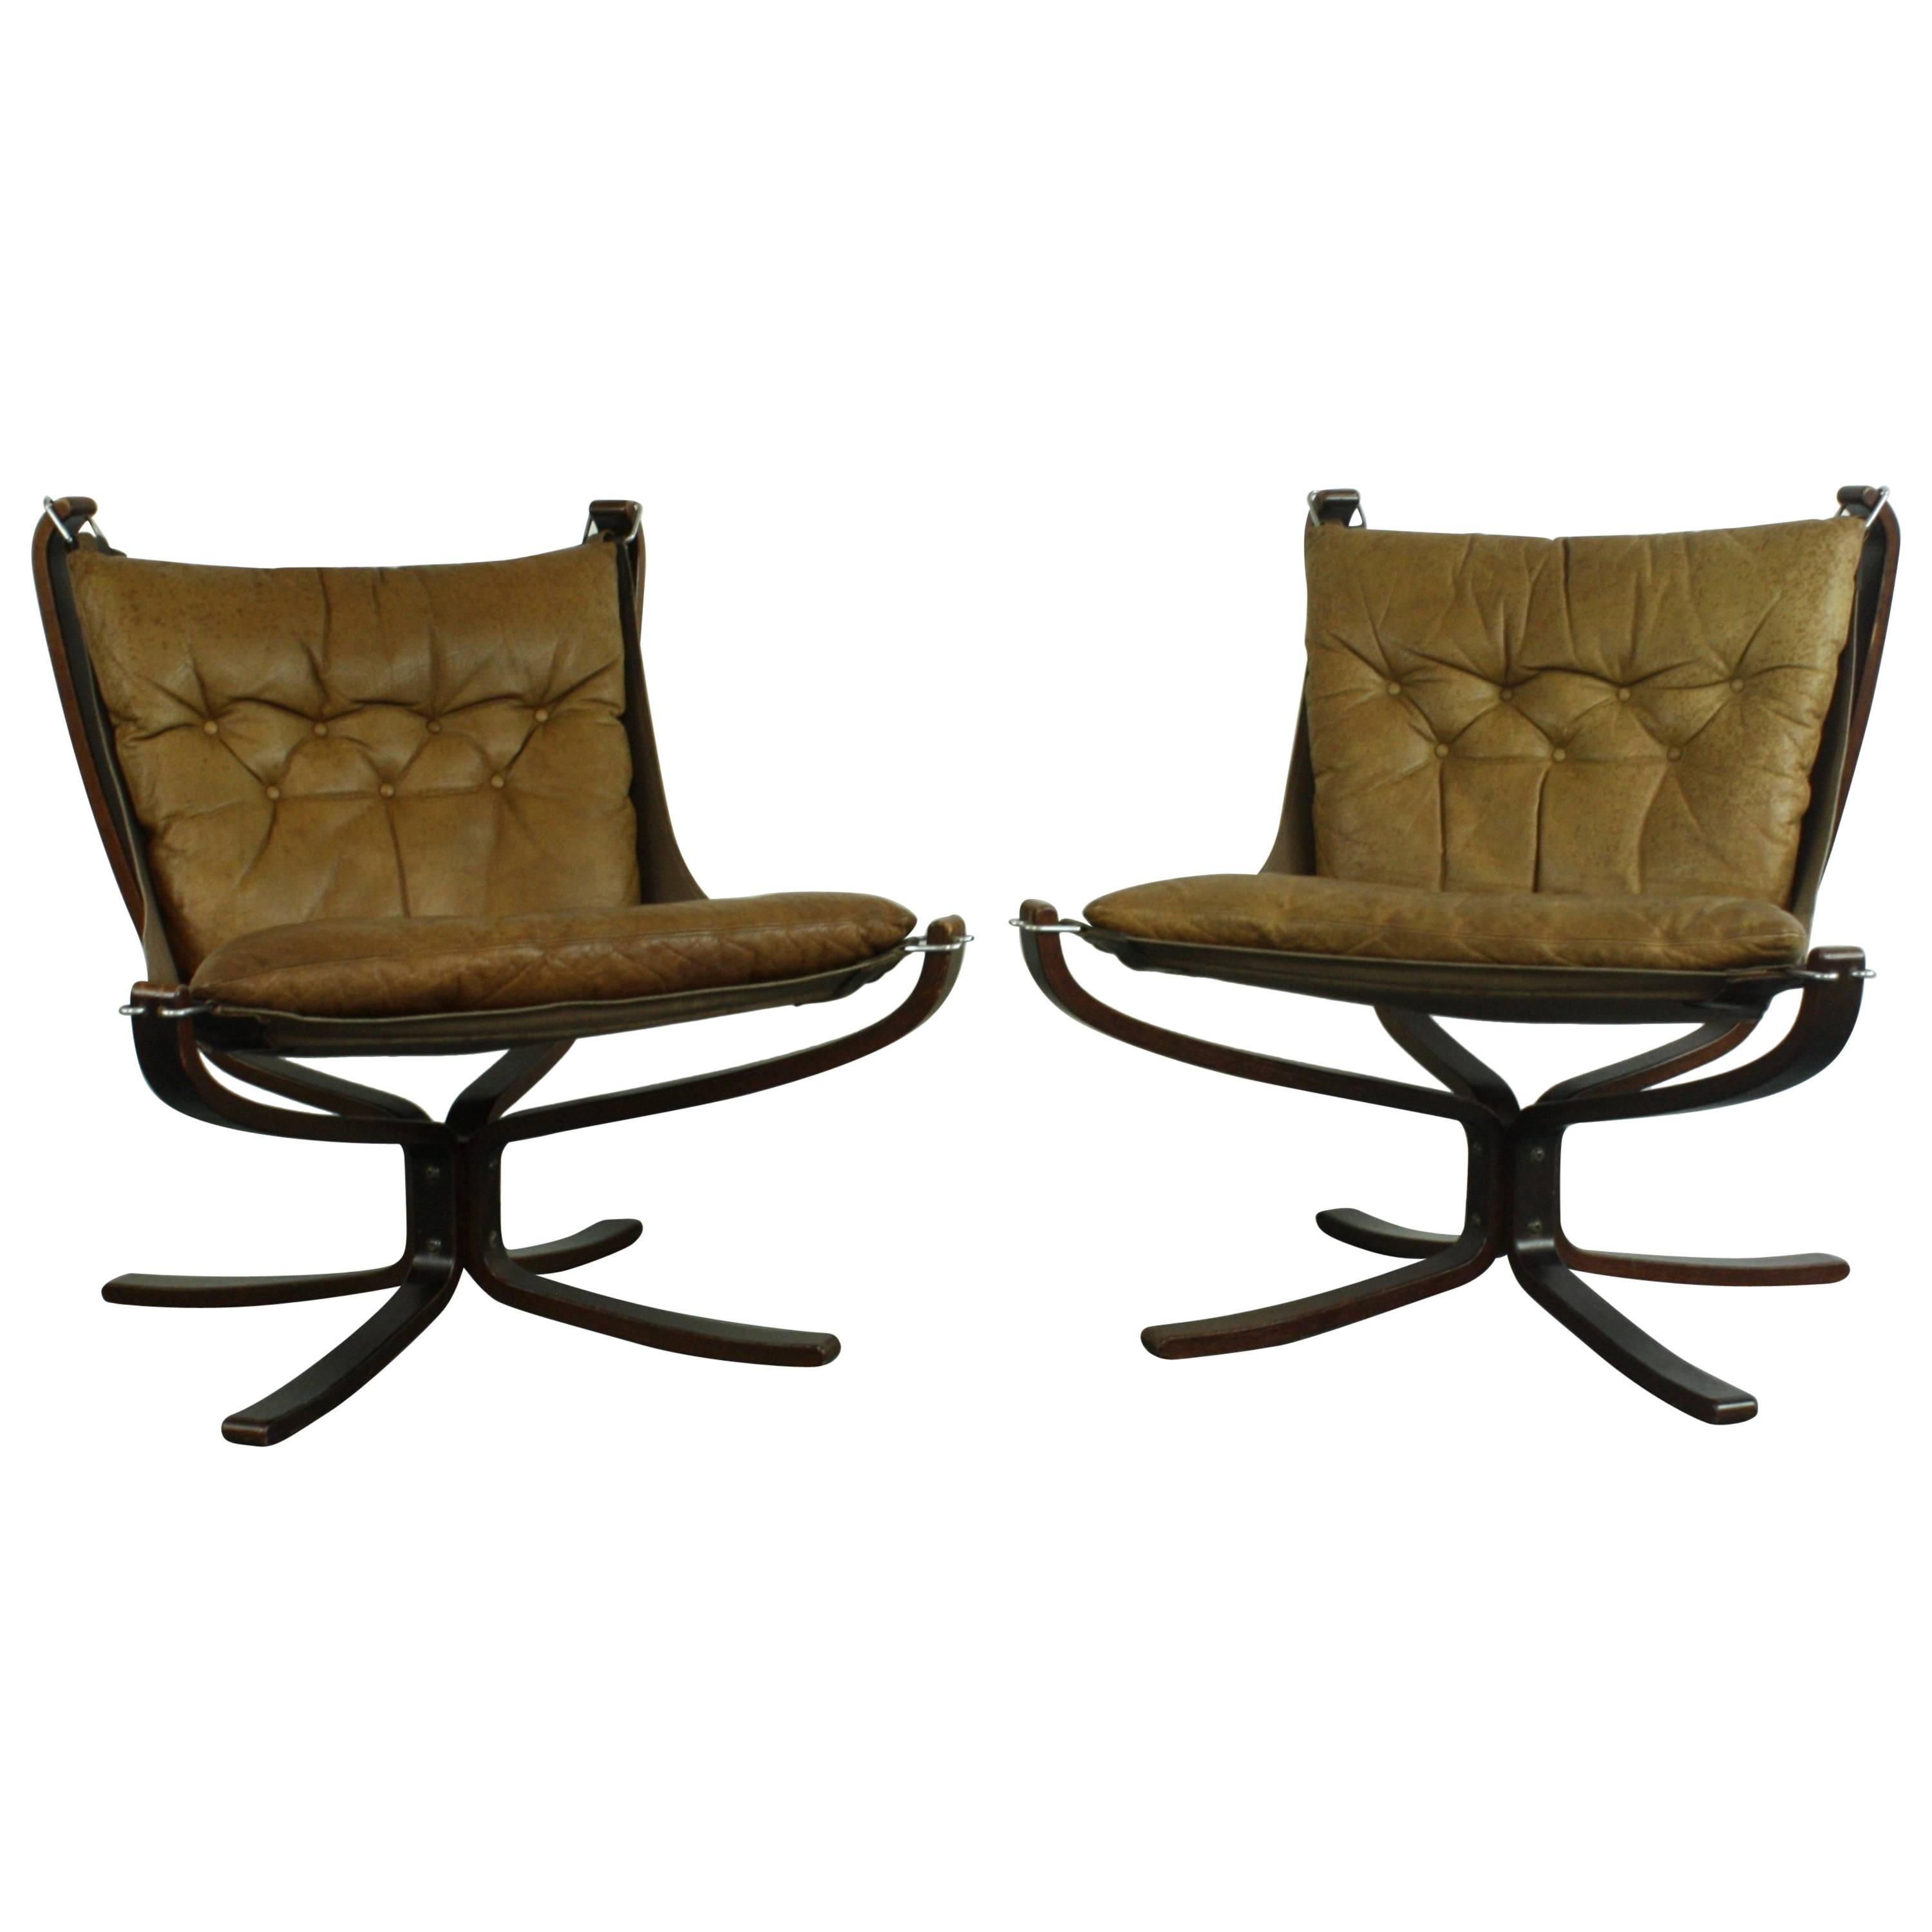 Pair of Vintage Low Back Camel Leather Falcon Chairs Designed by Sigurd Resell For Sale